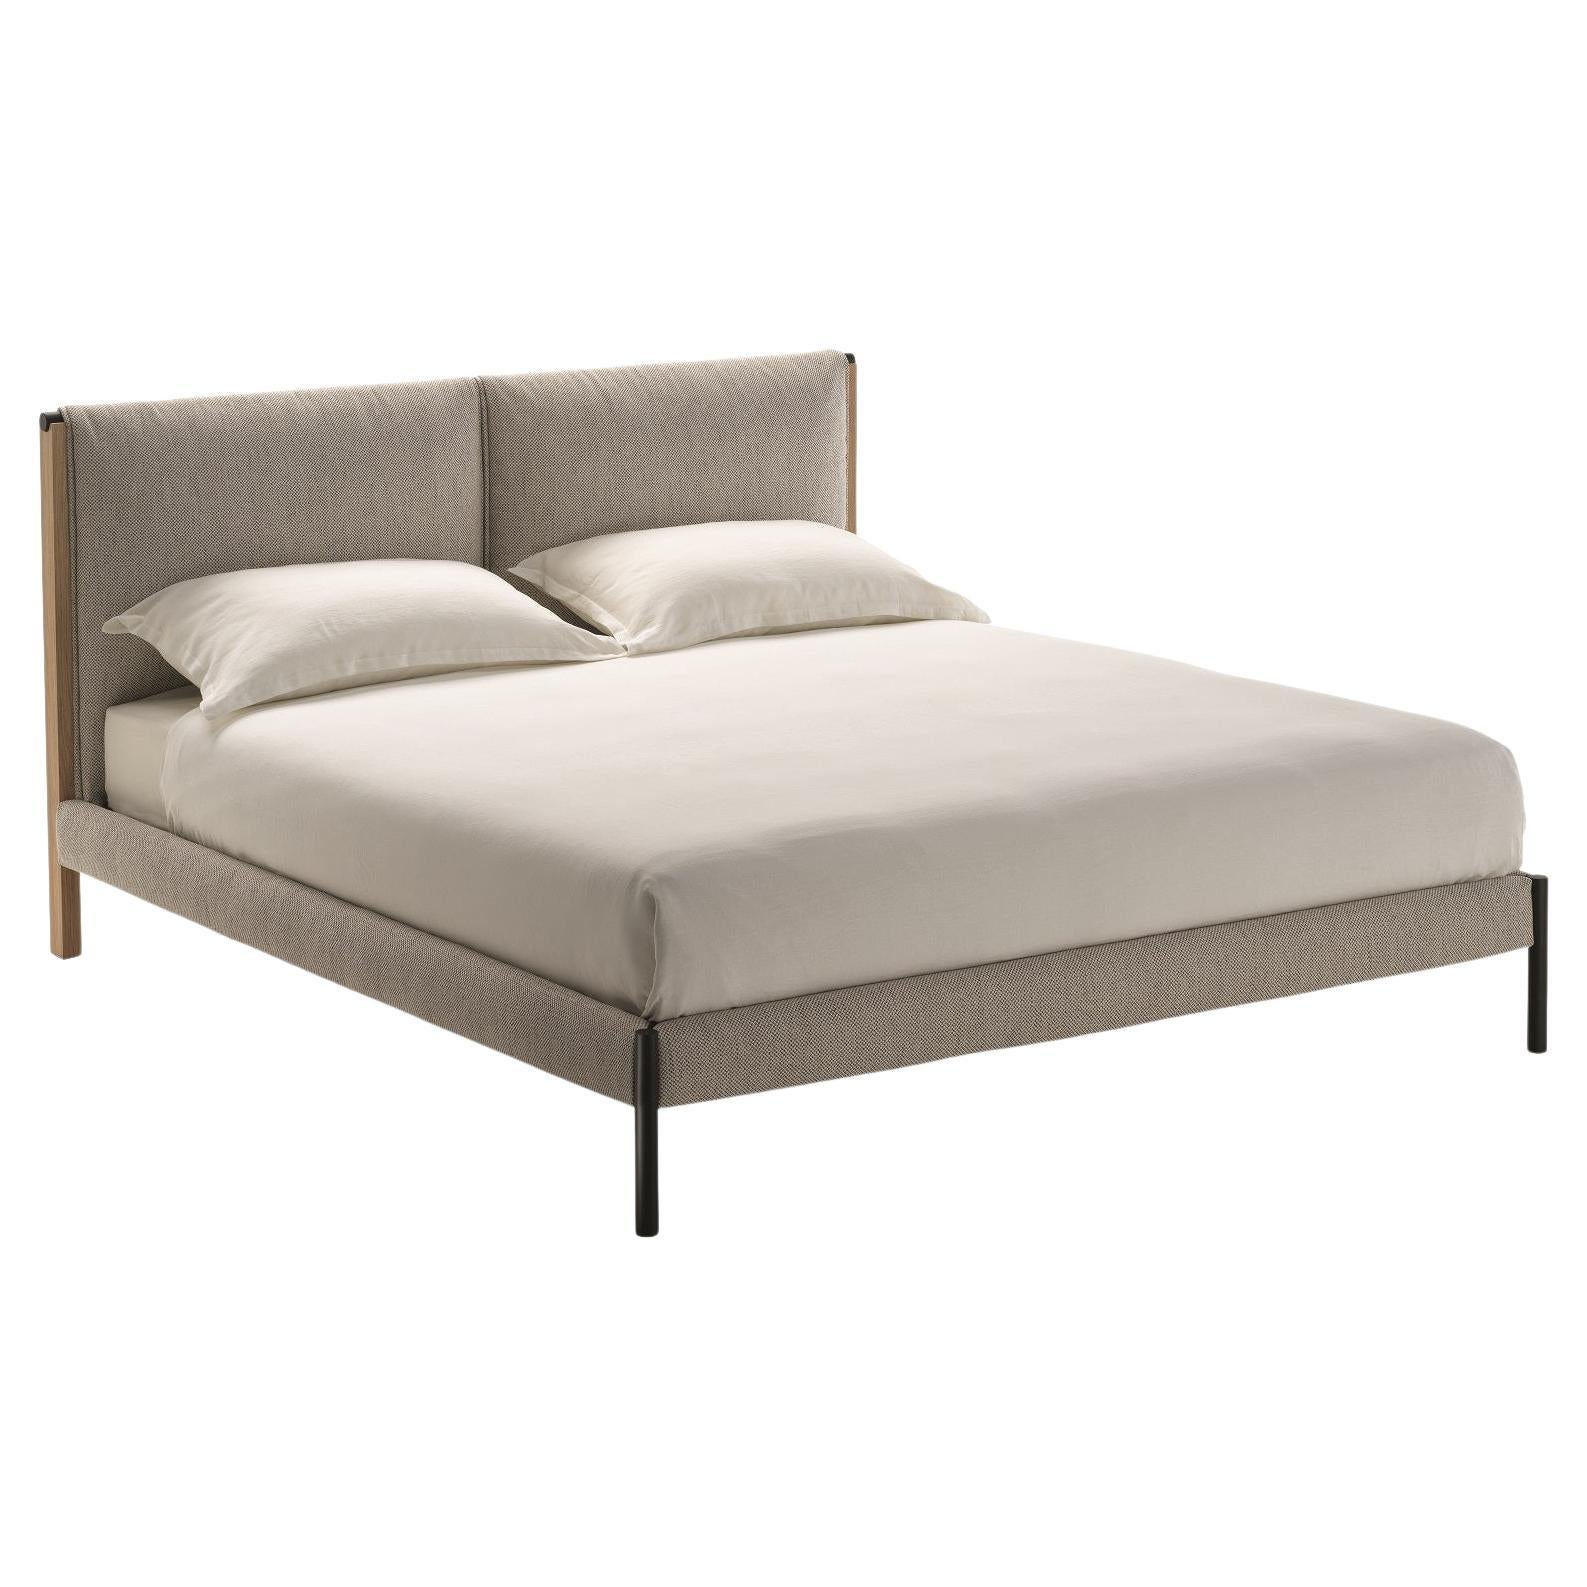 Zanotta Queen Size Ricordi Bed with Single Springing in Toce Upholstery